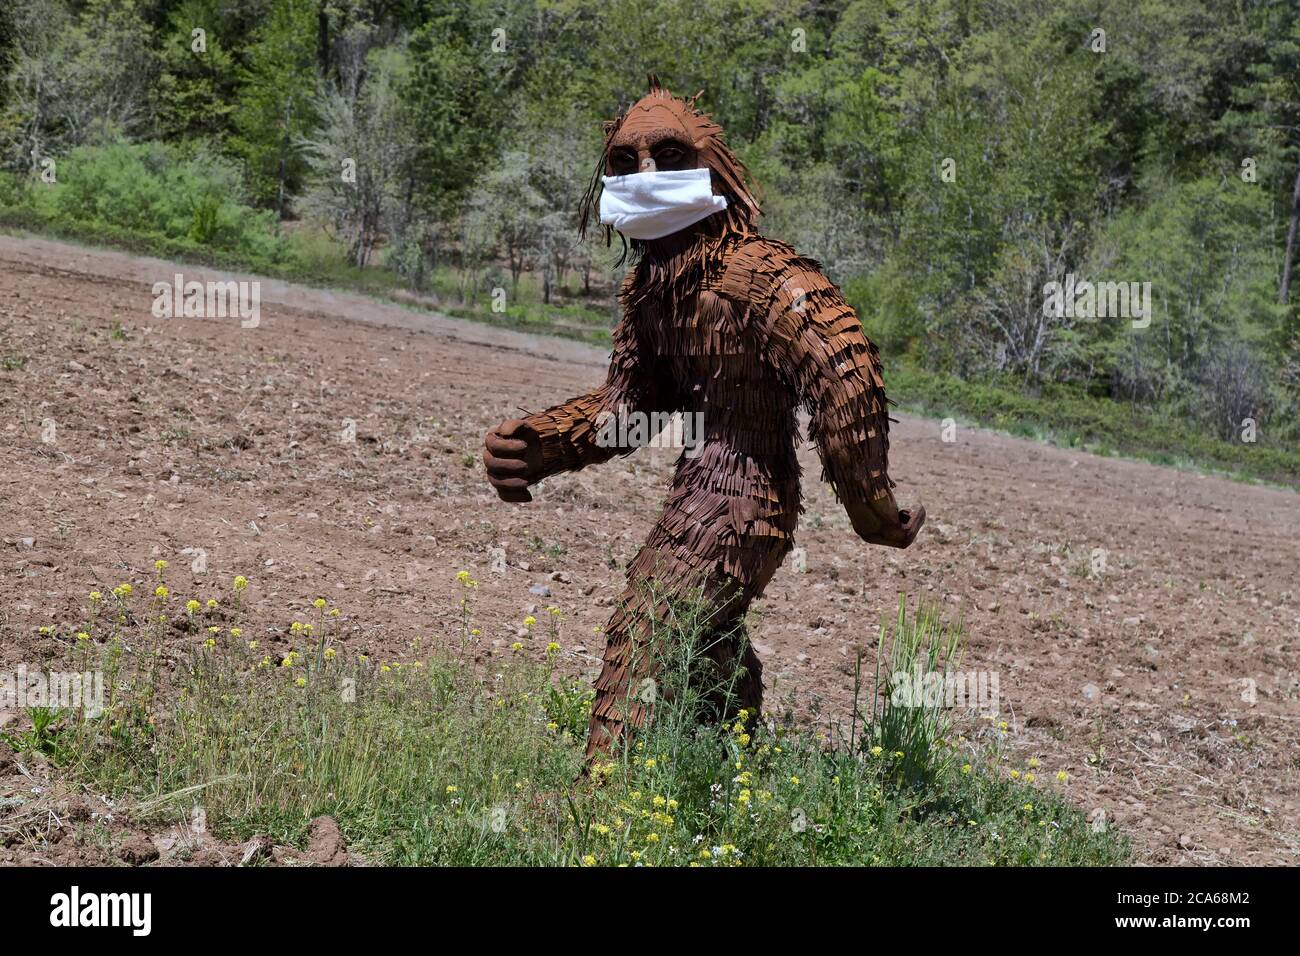 Bigfoot wearing COVID-19 antivirus mask, passing through cultivated agricultural field, forest in background. North American folklore. Stock Photo